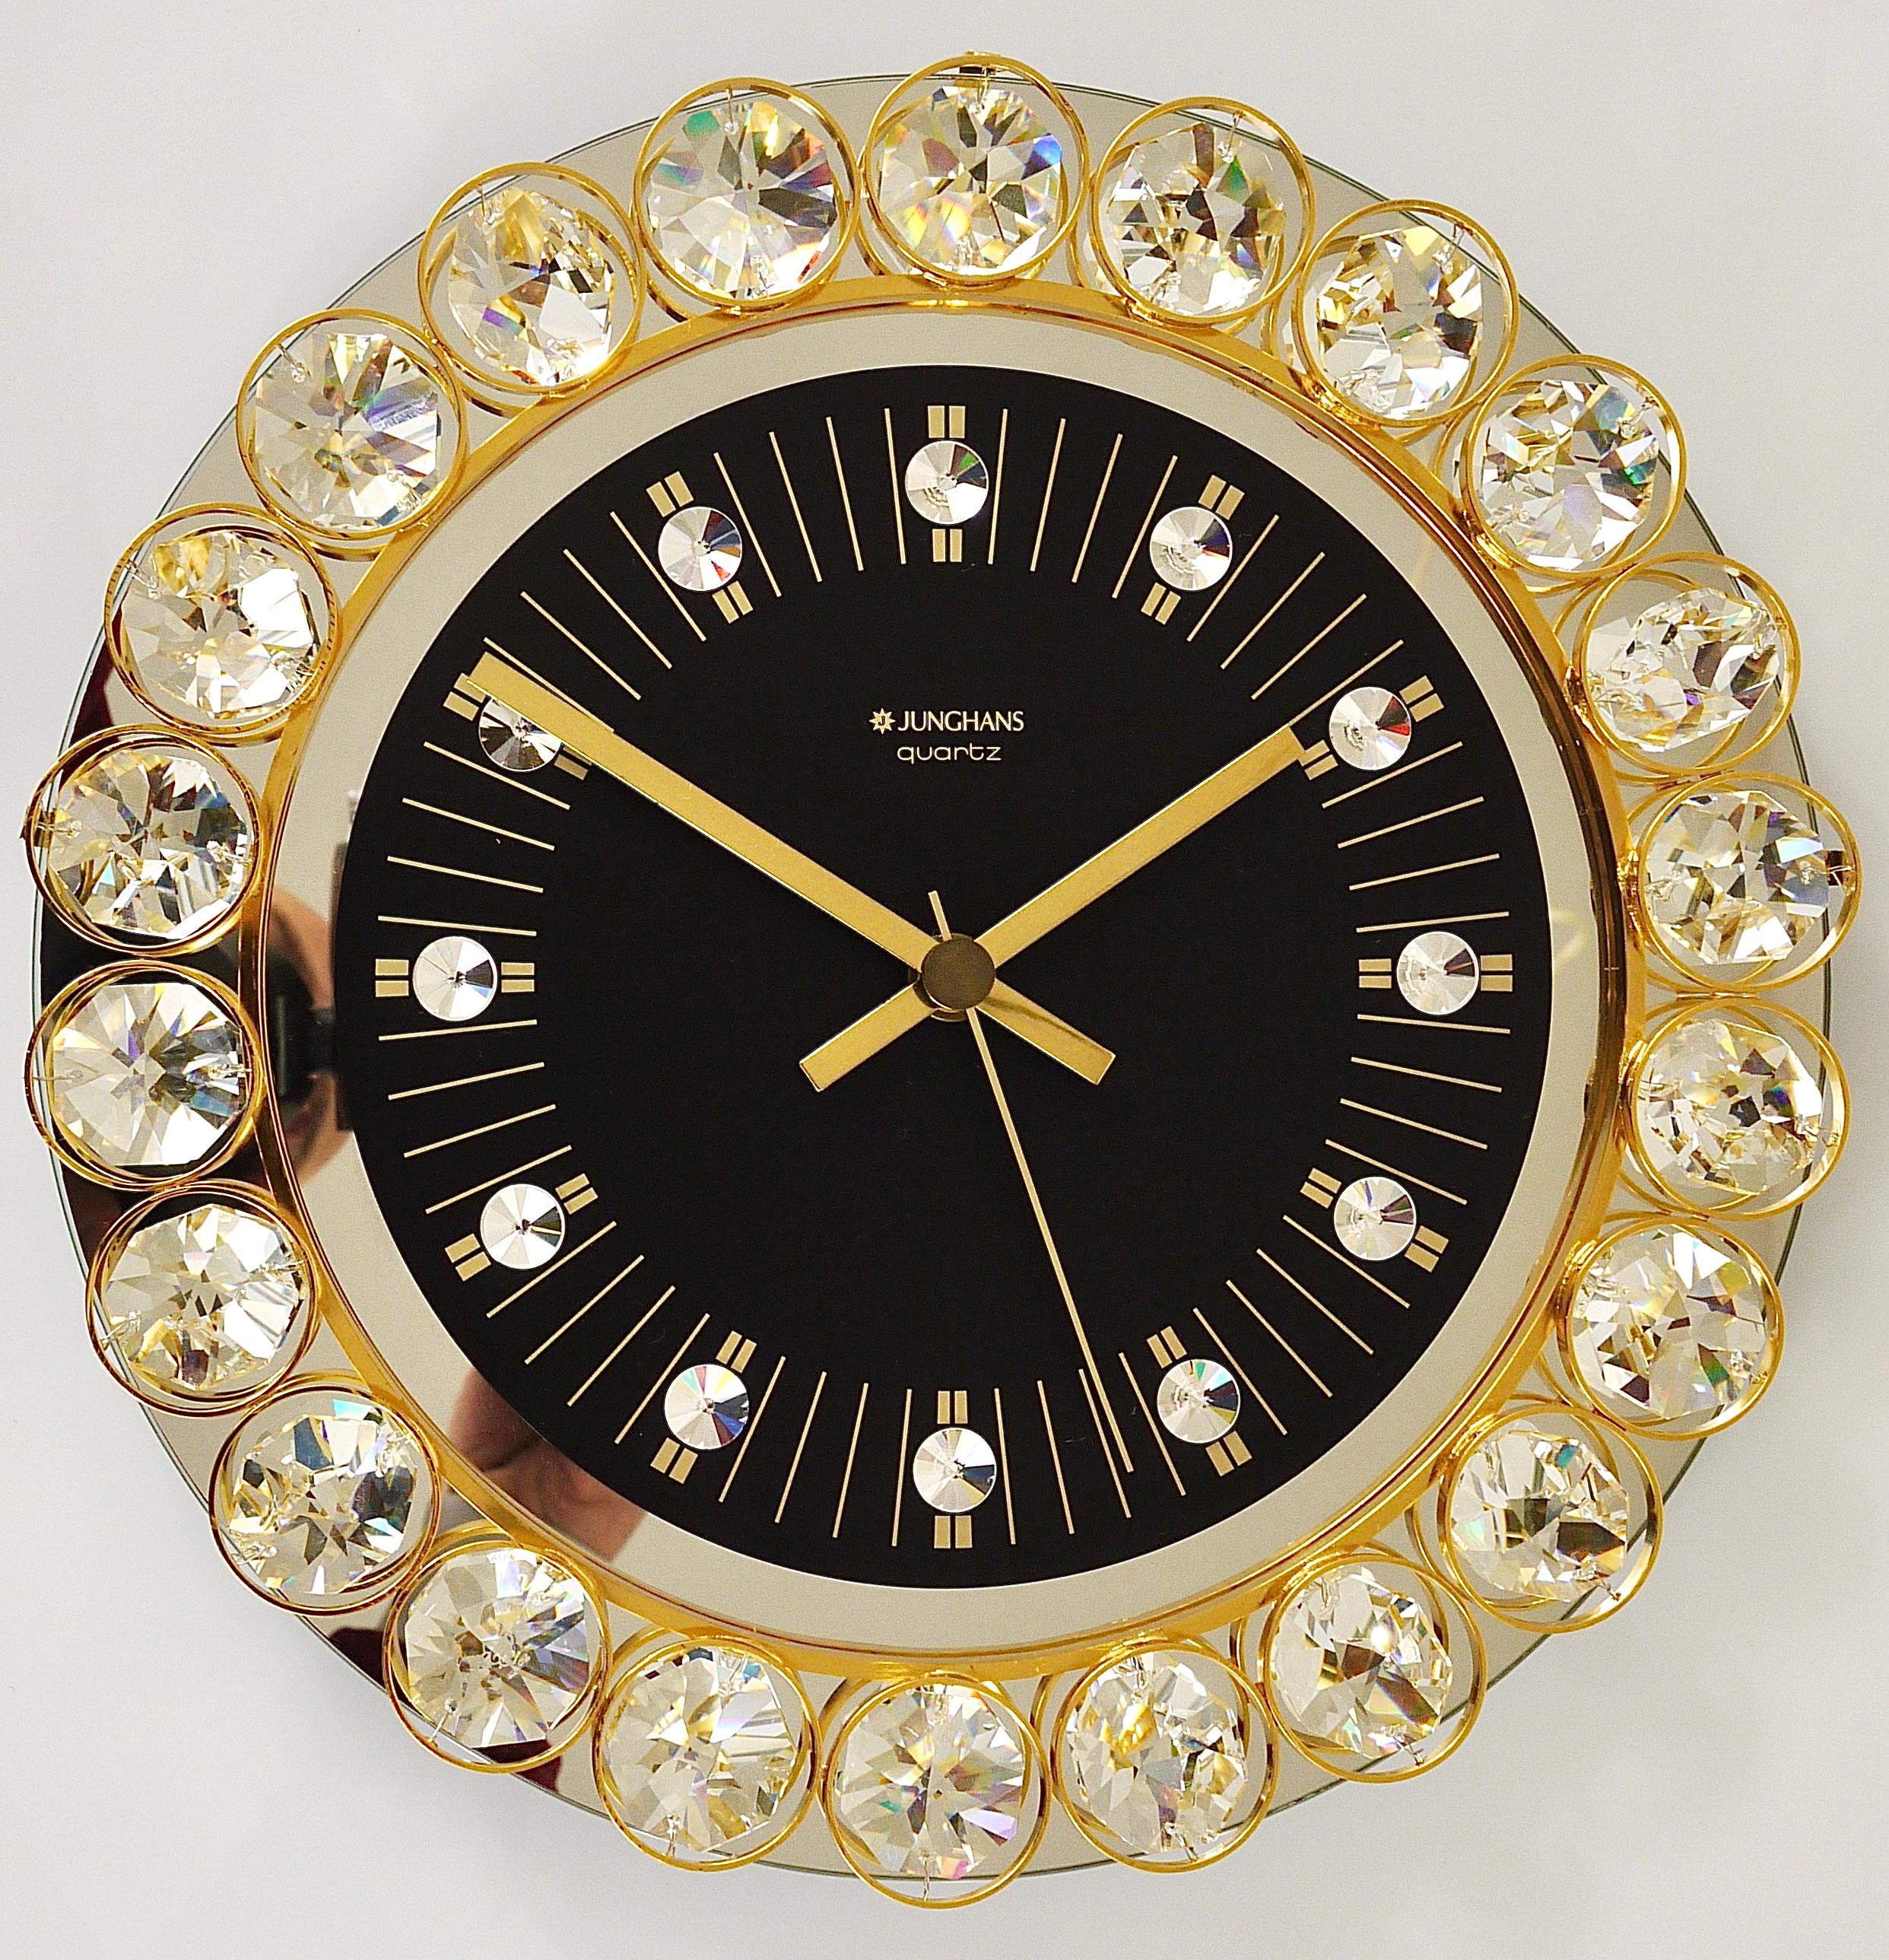 A beautiful round wall clock, executed in the 1970s by Junghans, Germany, in the style of Gaetano Sciolari or Palwa. The clocksface is made of mirror glass with a black clocks face and nice crystal indices. The frame is made of gilt metal and